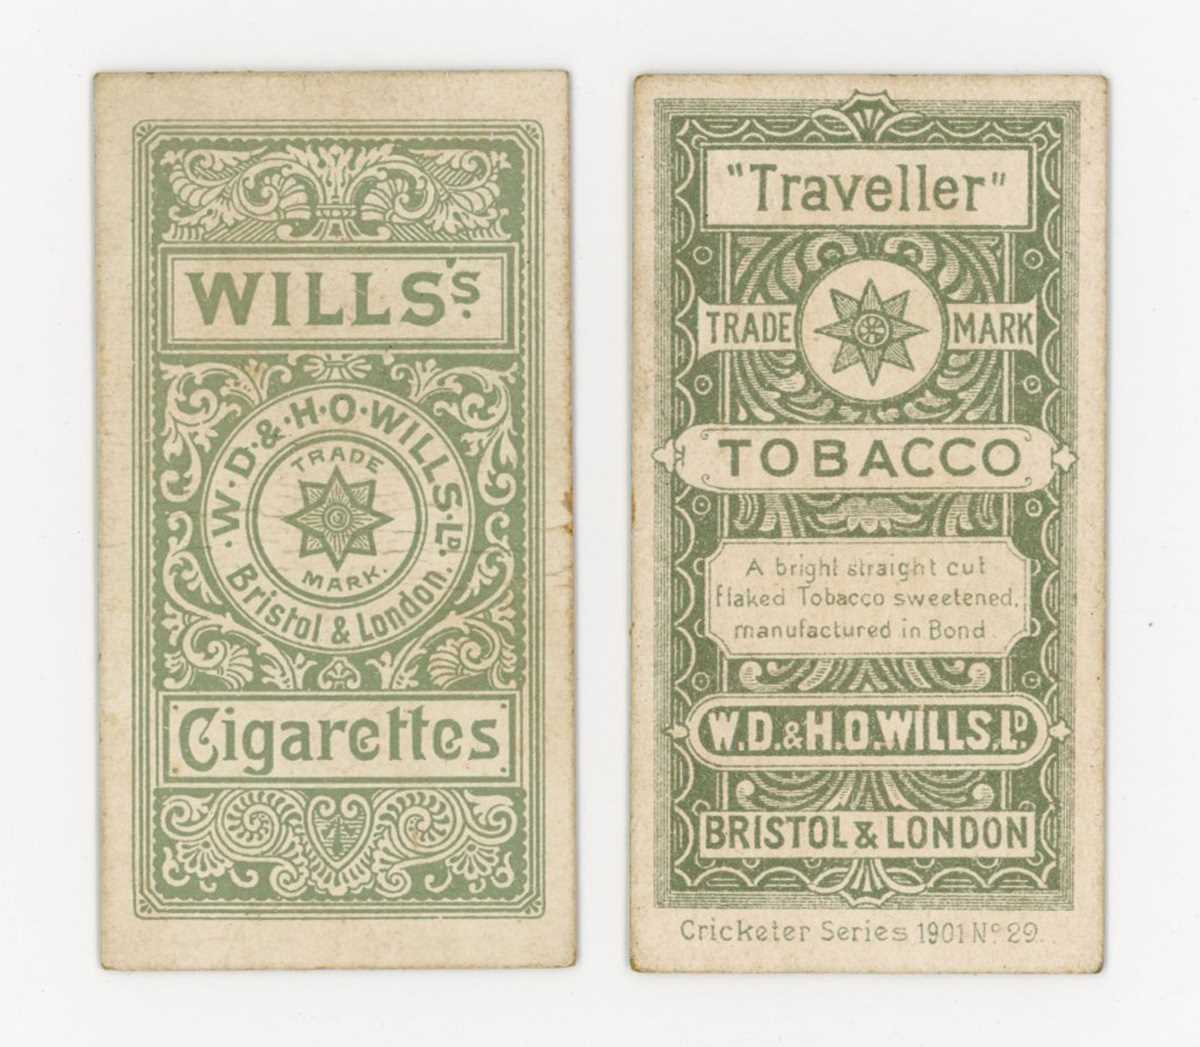 A set of 50 Wills 'Cricketers Series' cigarette cards circa 1901, together with 16 Wills ‘ - Image 19 of 19